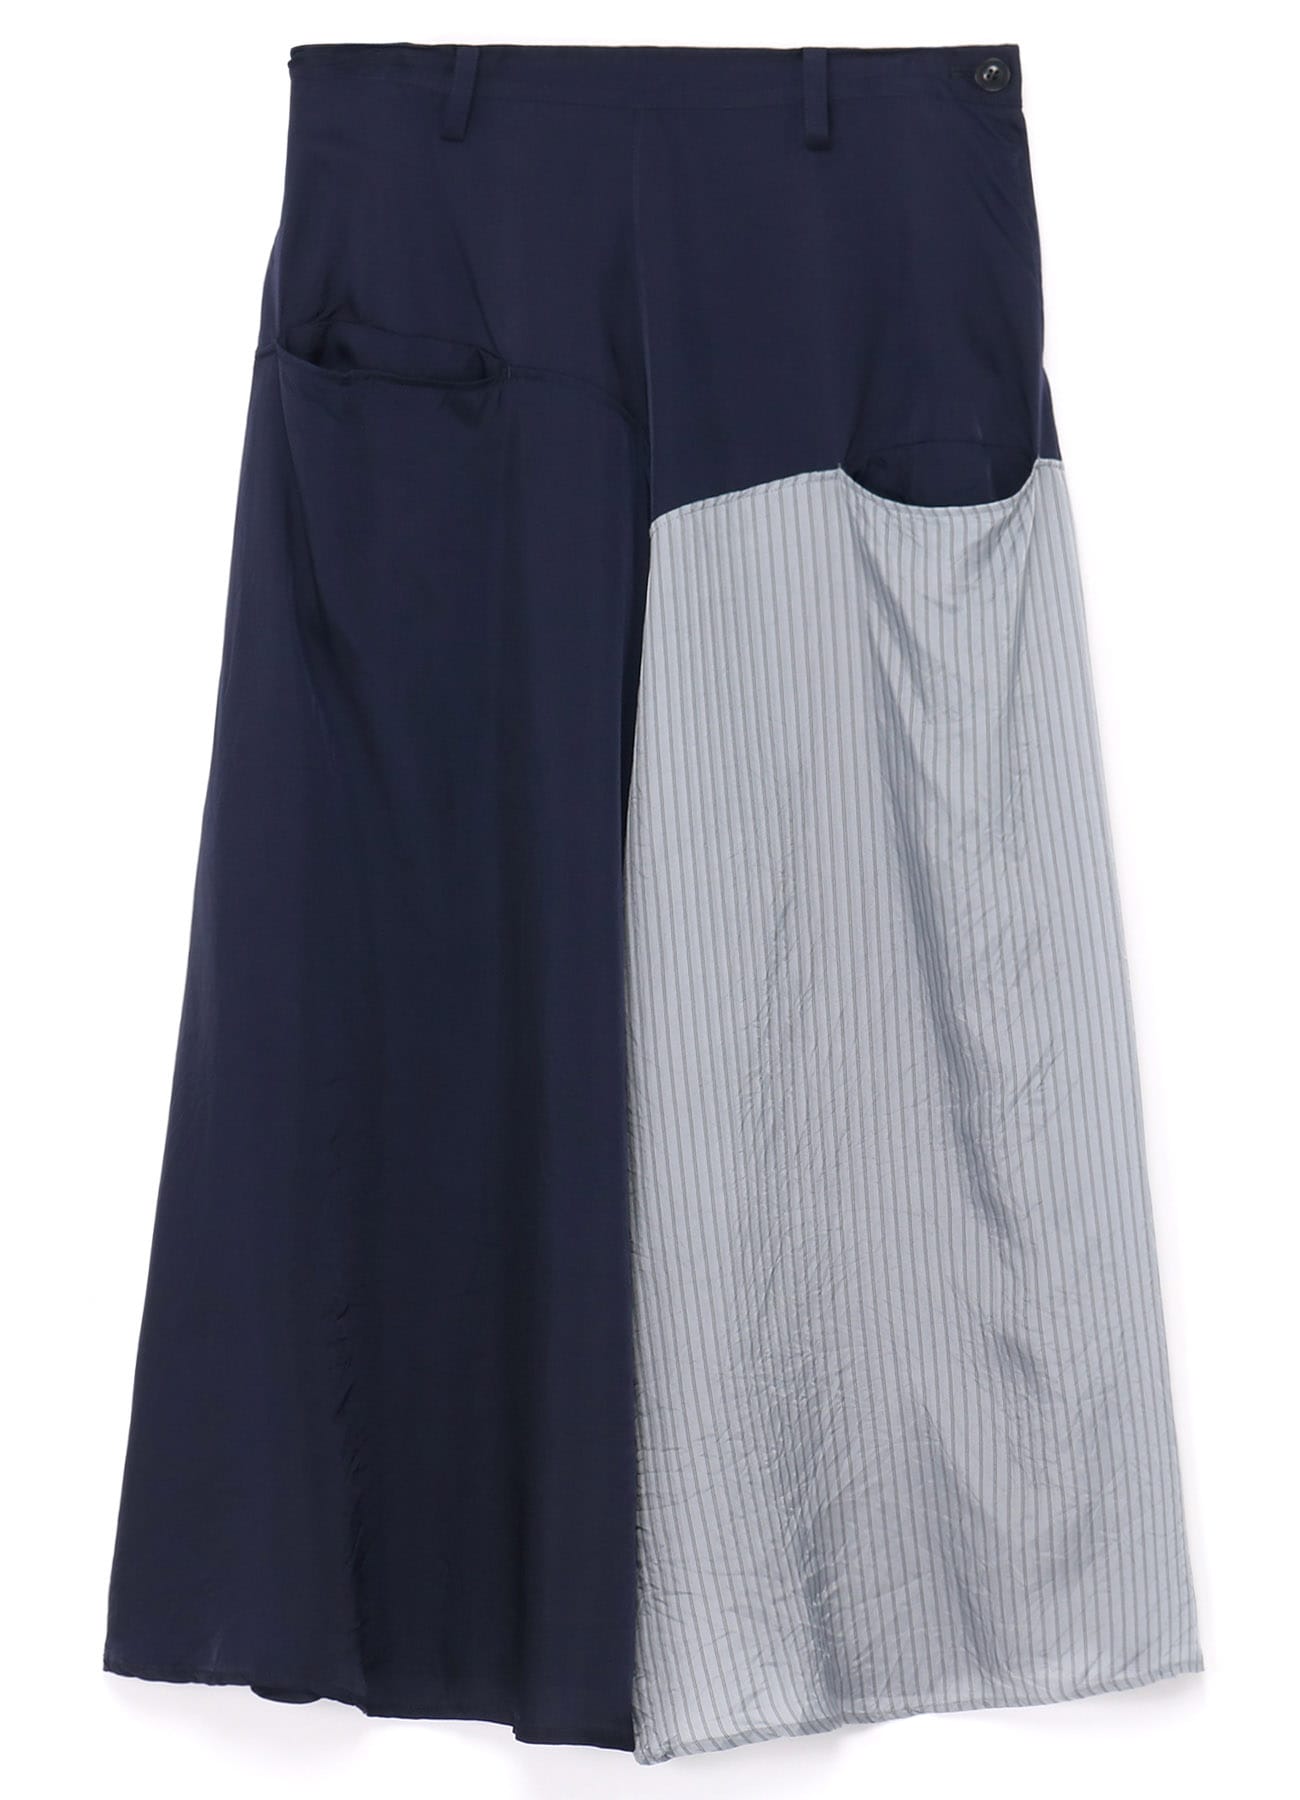 STRIPED CUPRO SKIRT WITH POCKETS